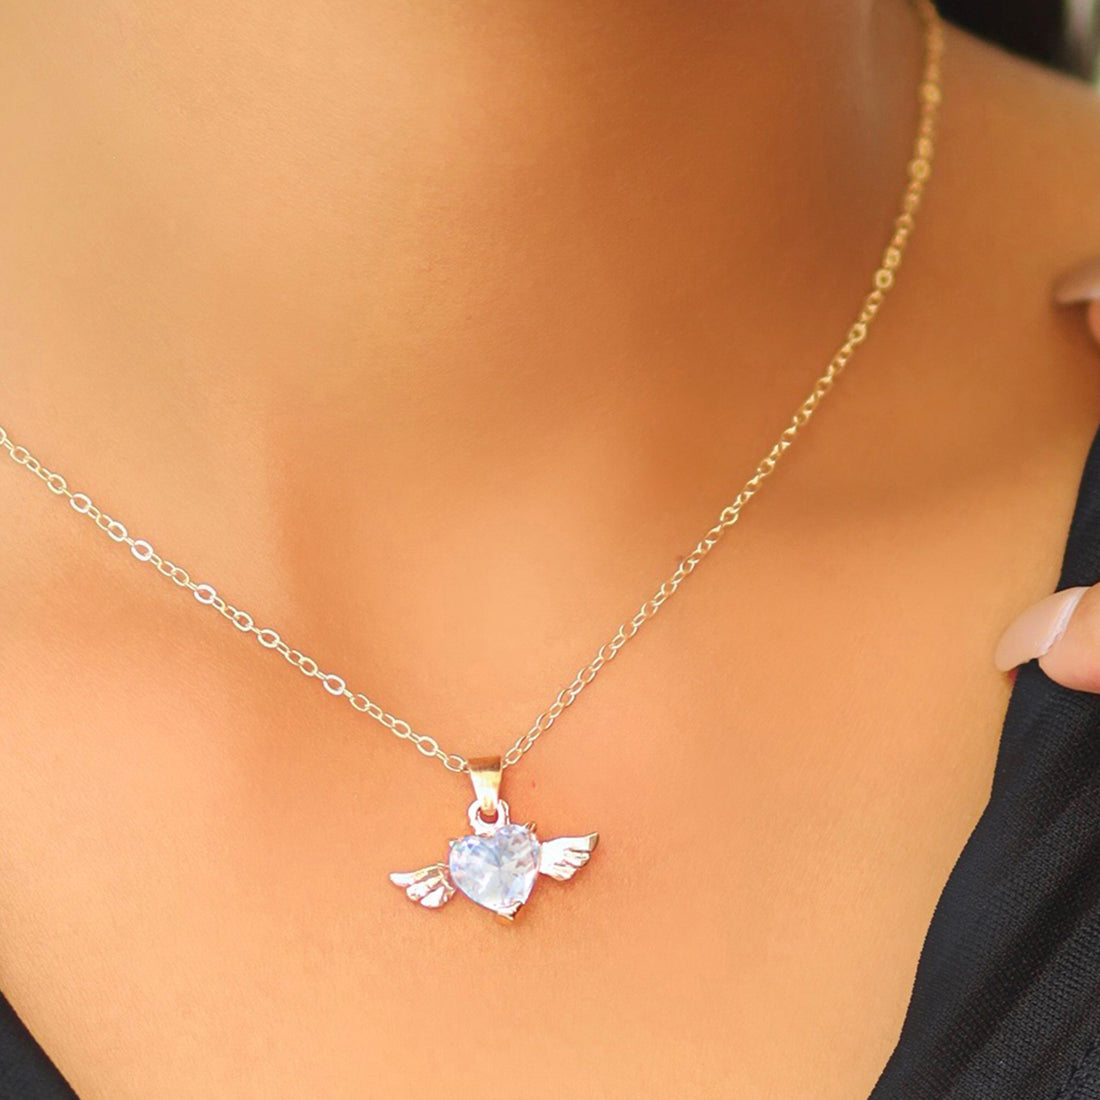 Diamante Heart with Wings Gold-Toned Mini Pendant Necklace